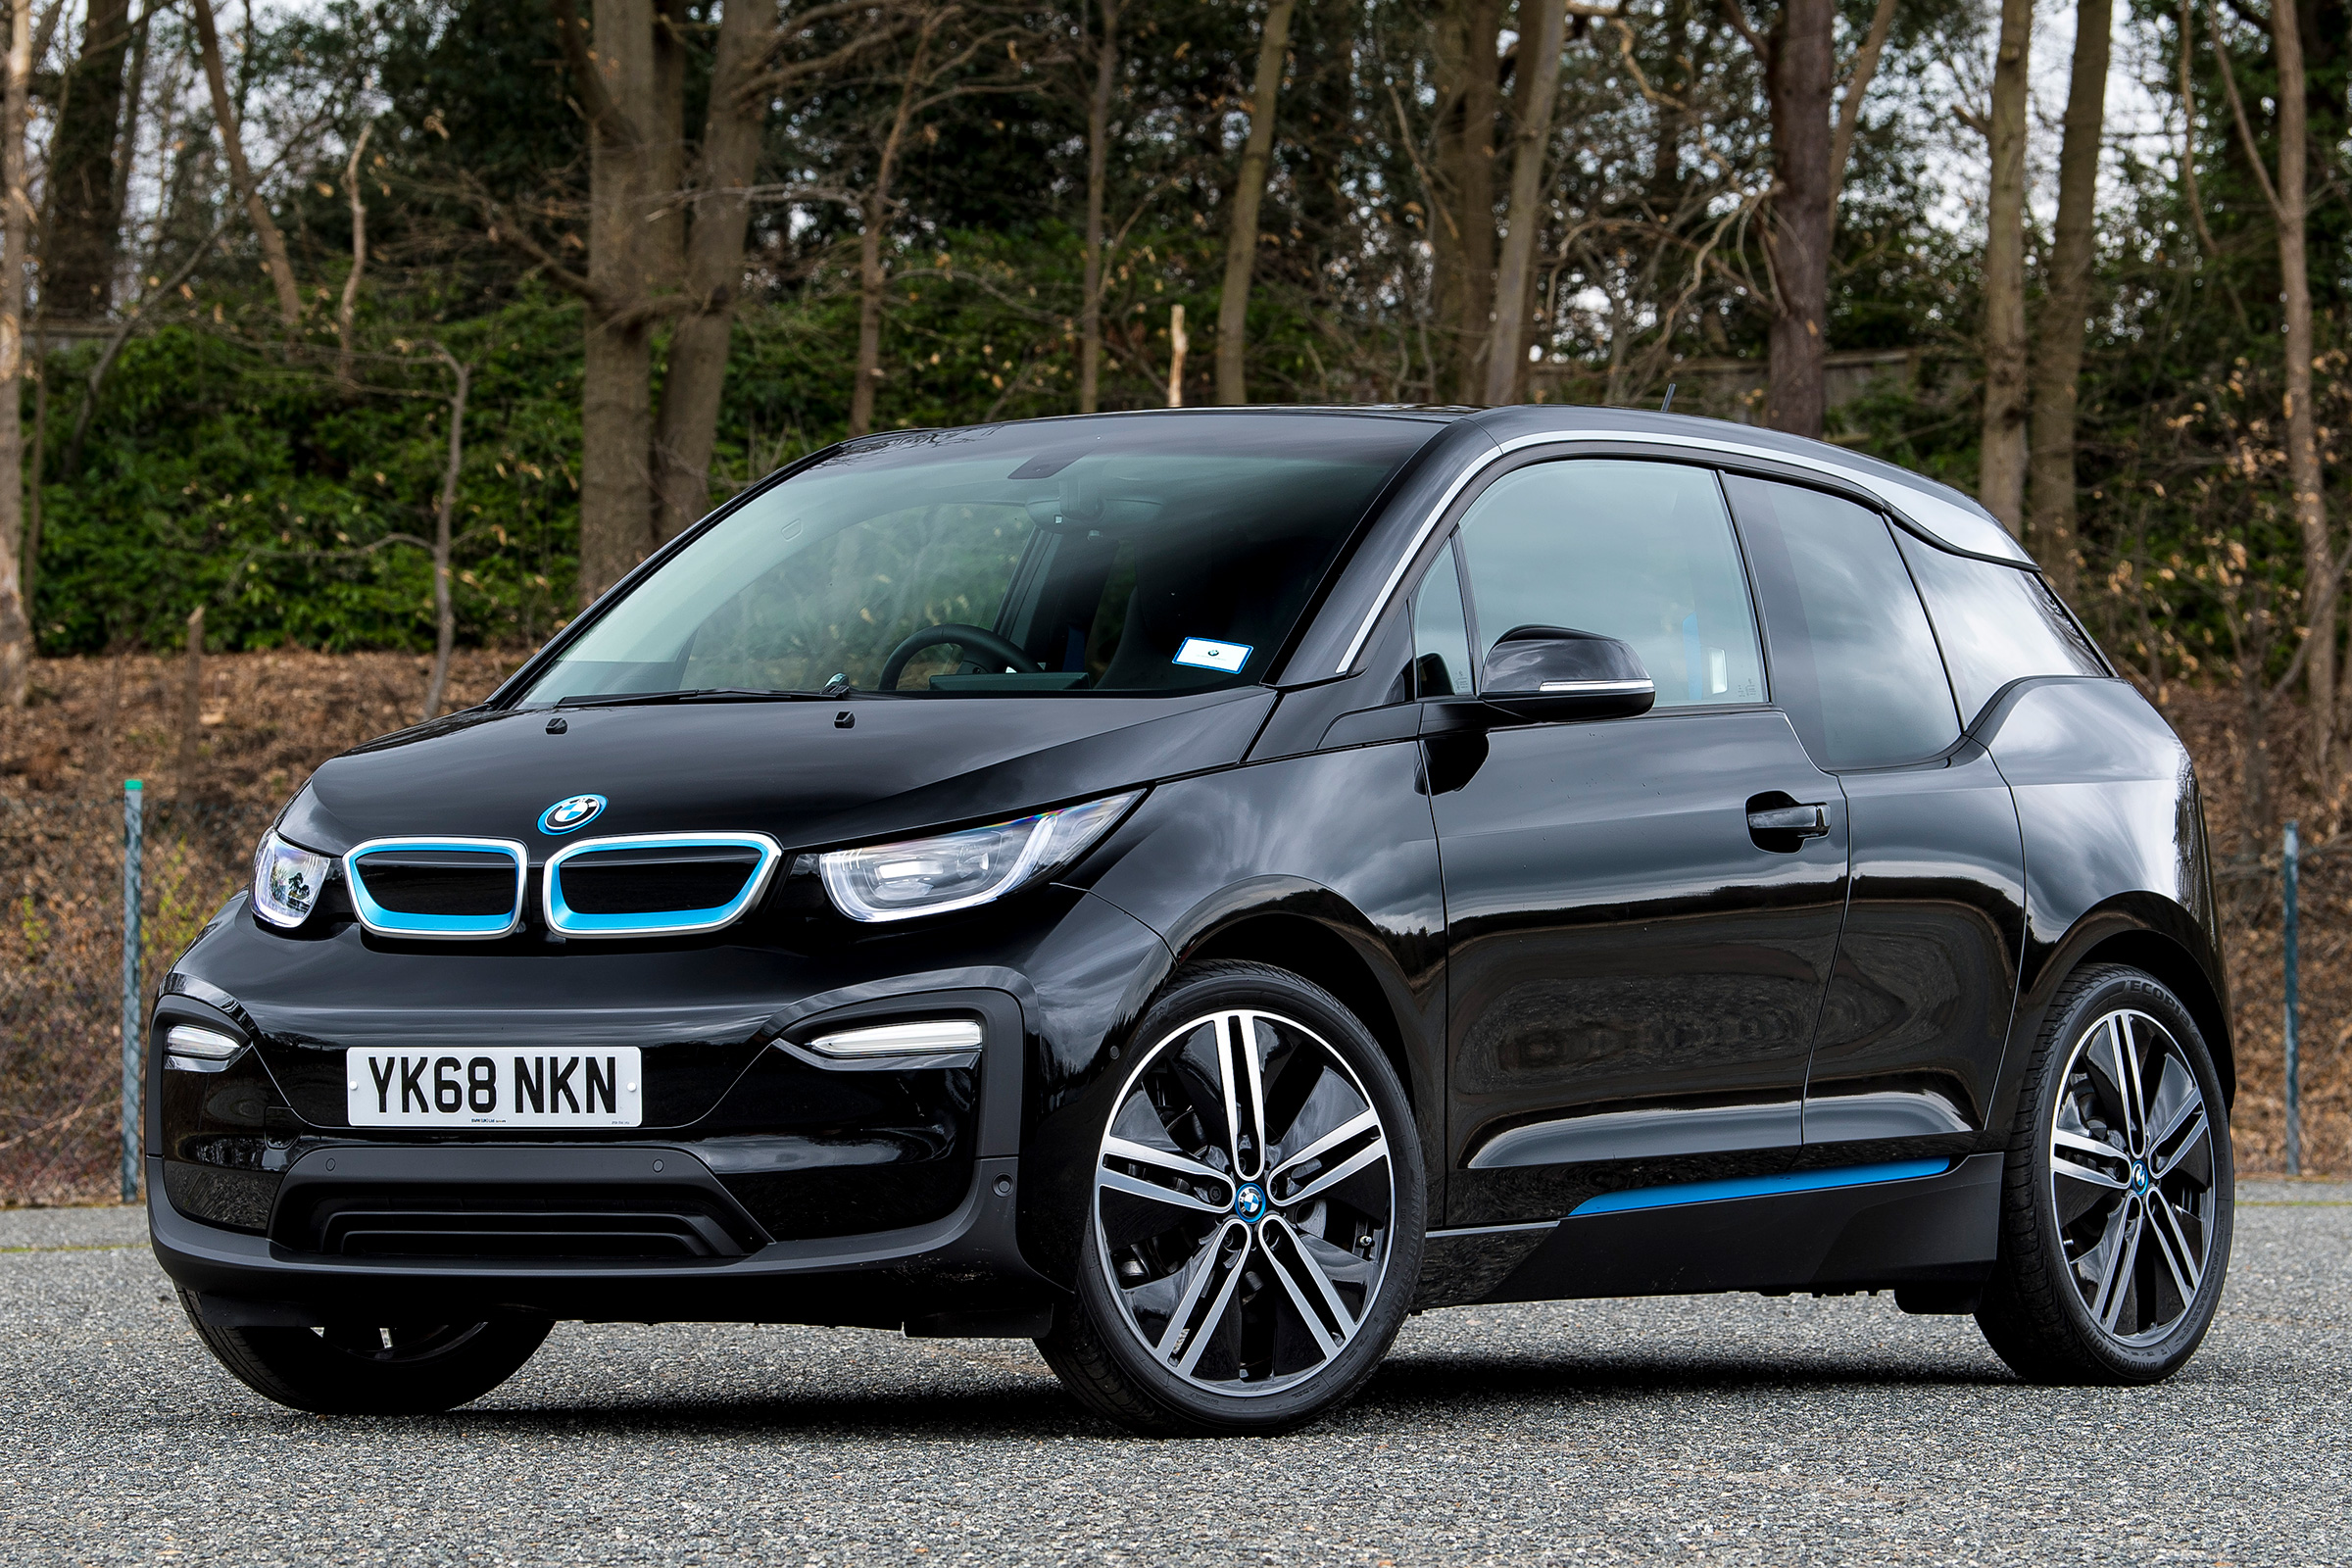 bmw i3 electric car may not be replaced